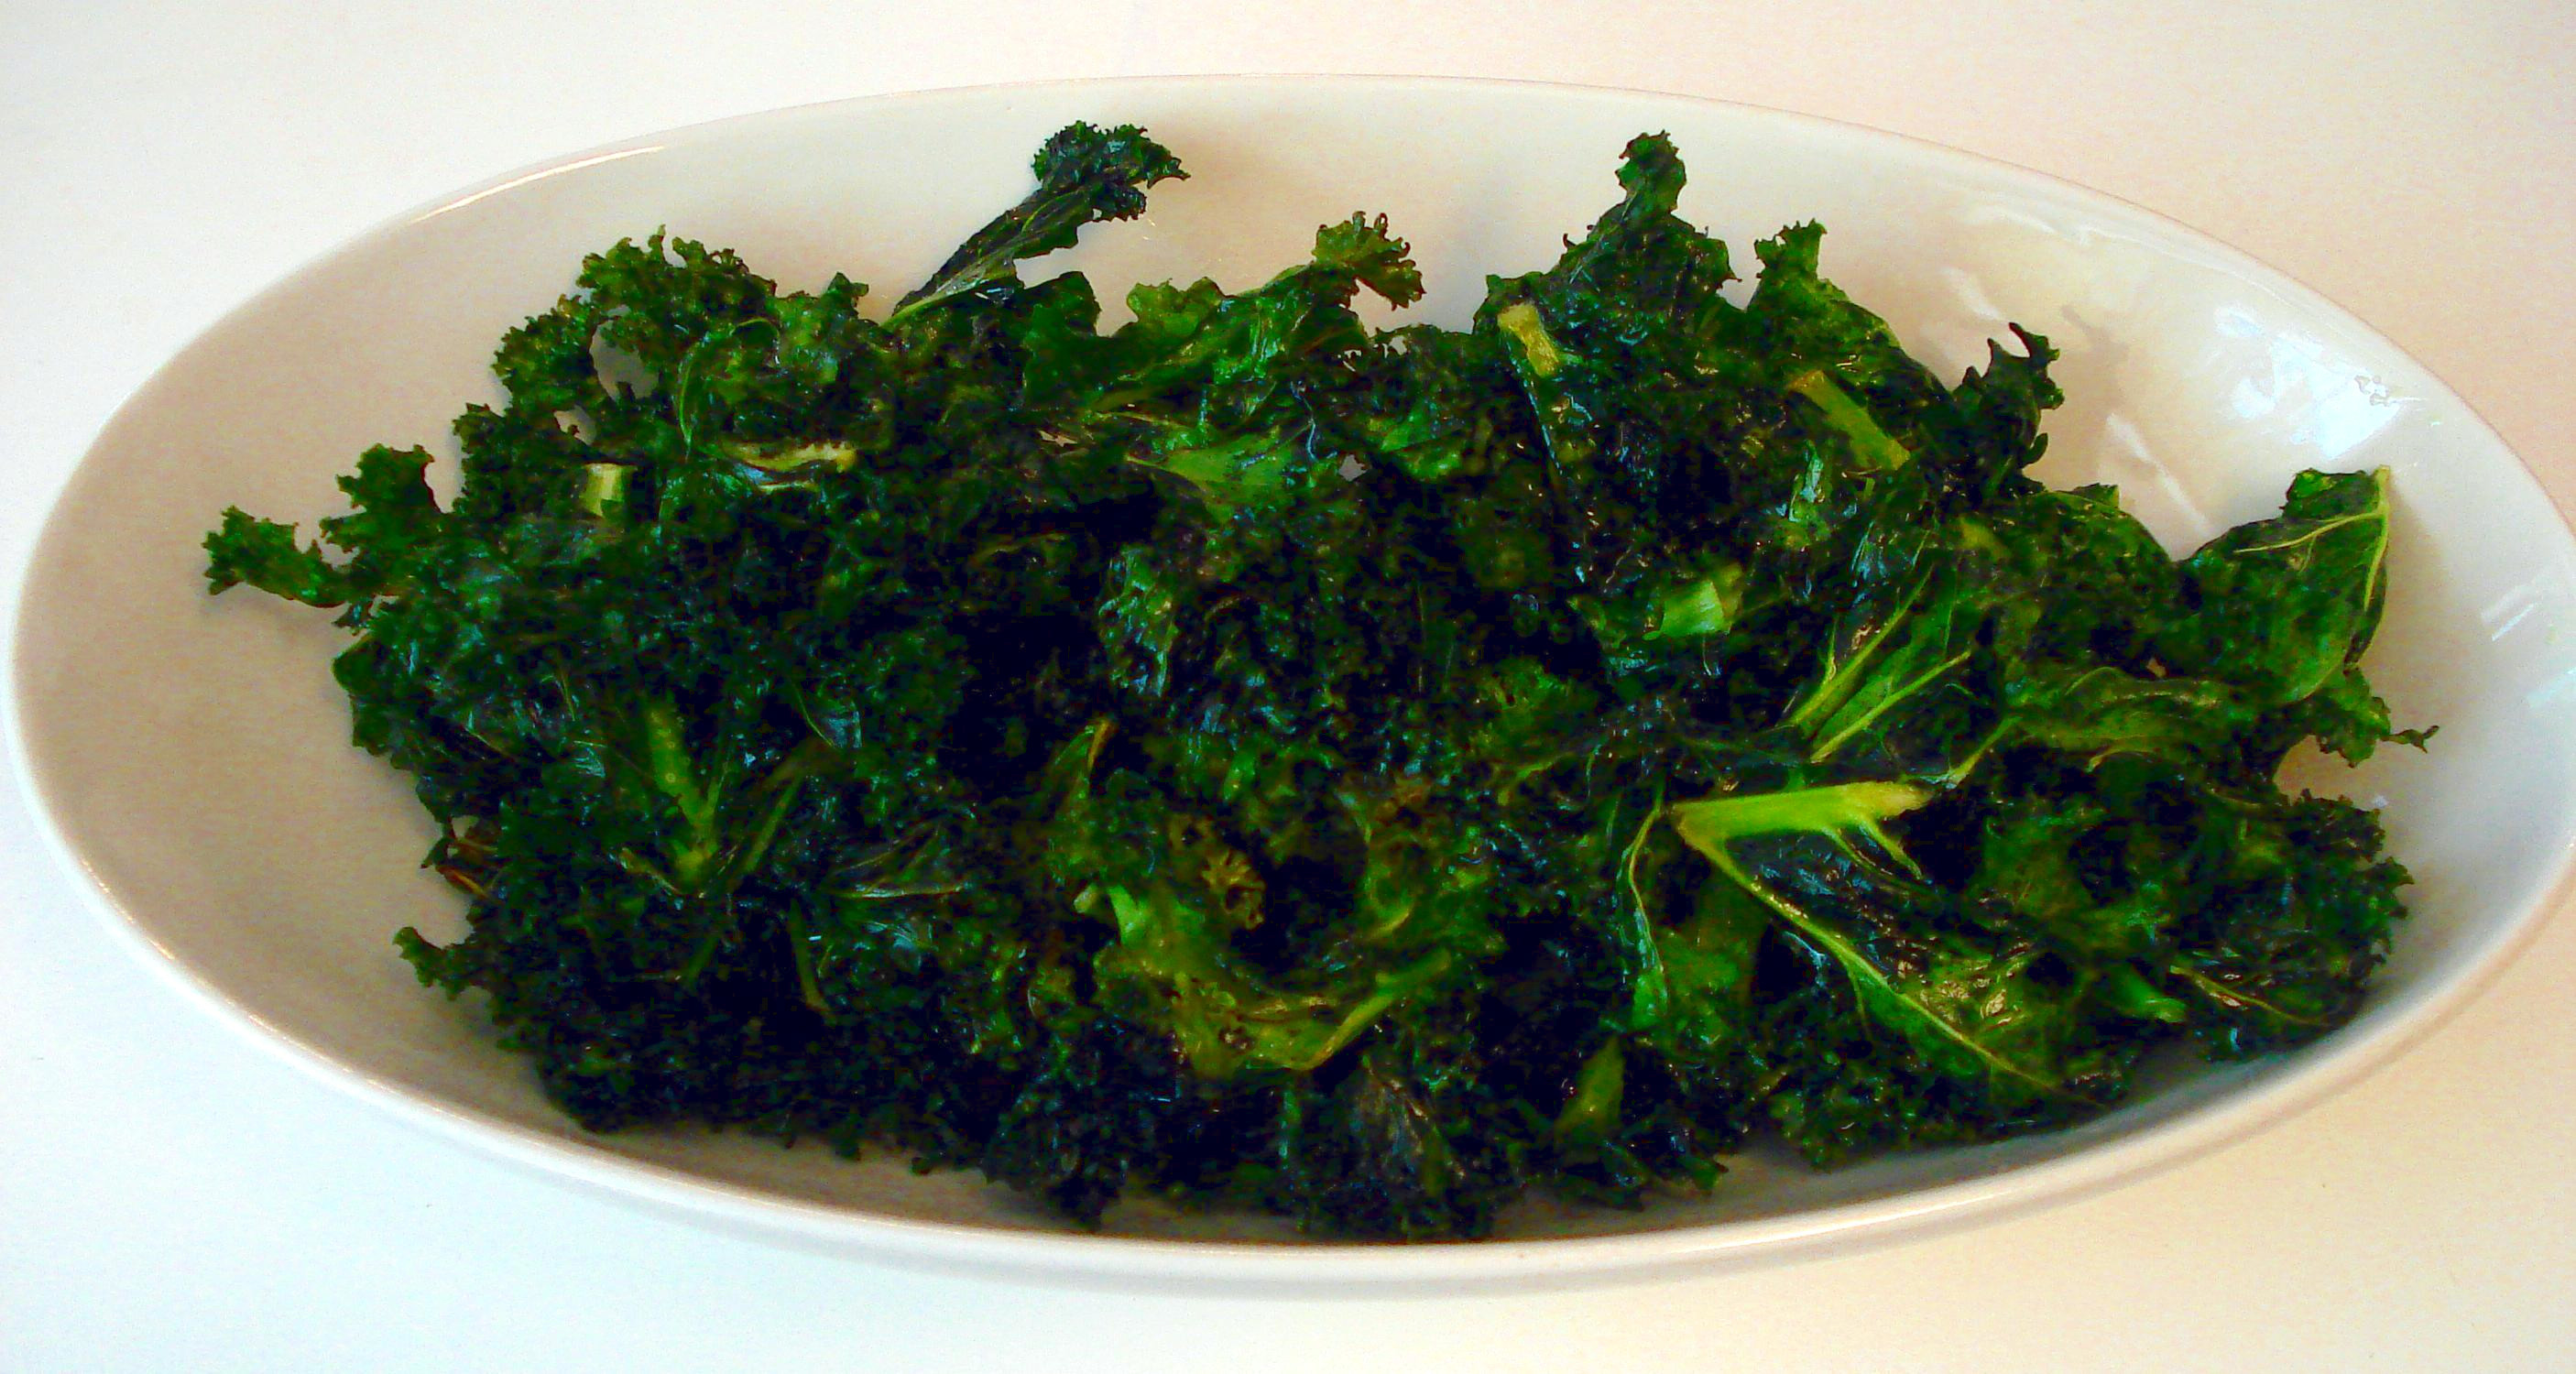 Easy Oven Baked Kale Chips • Oh Snap! Let's Eat!